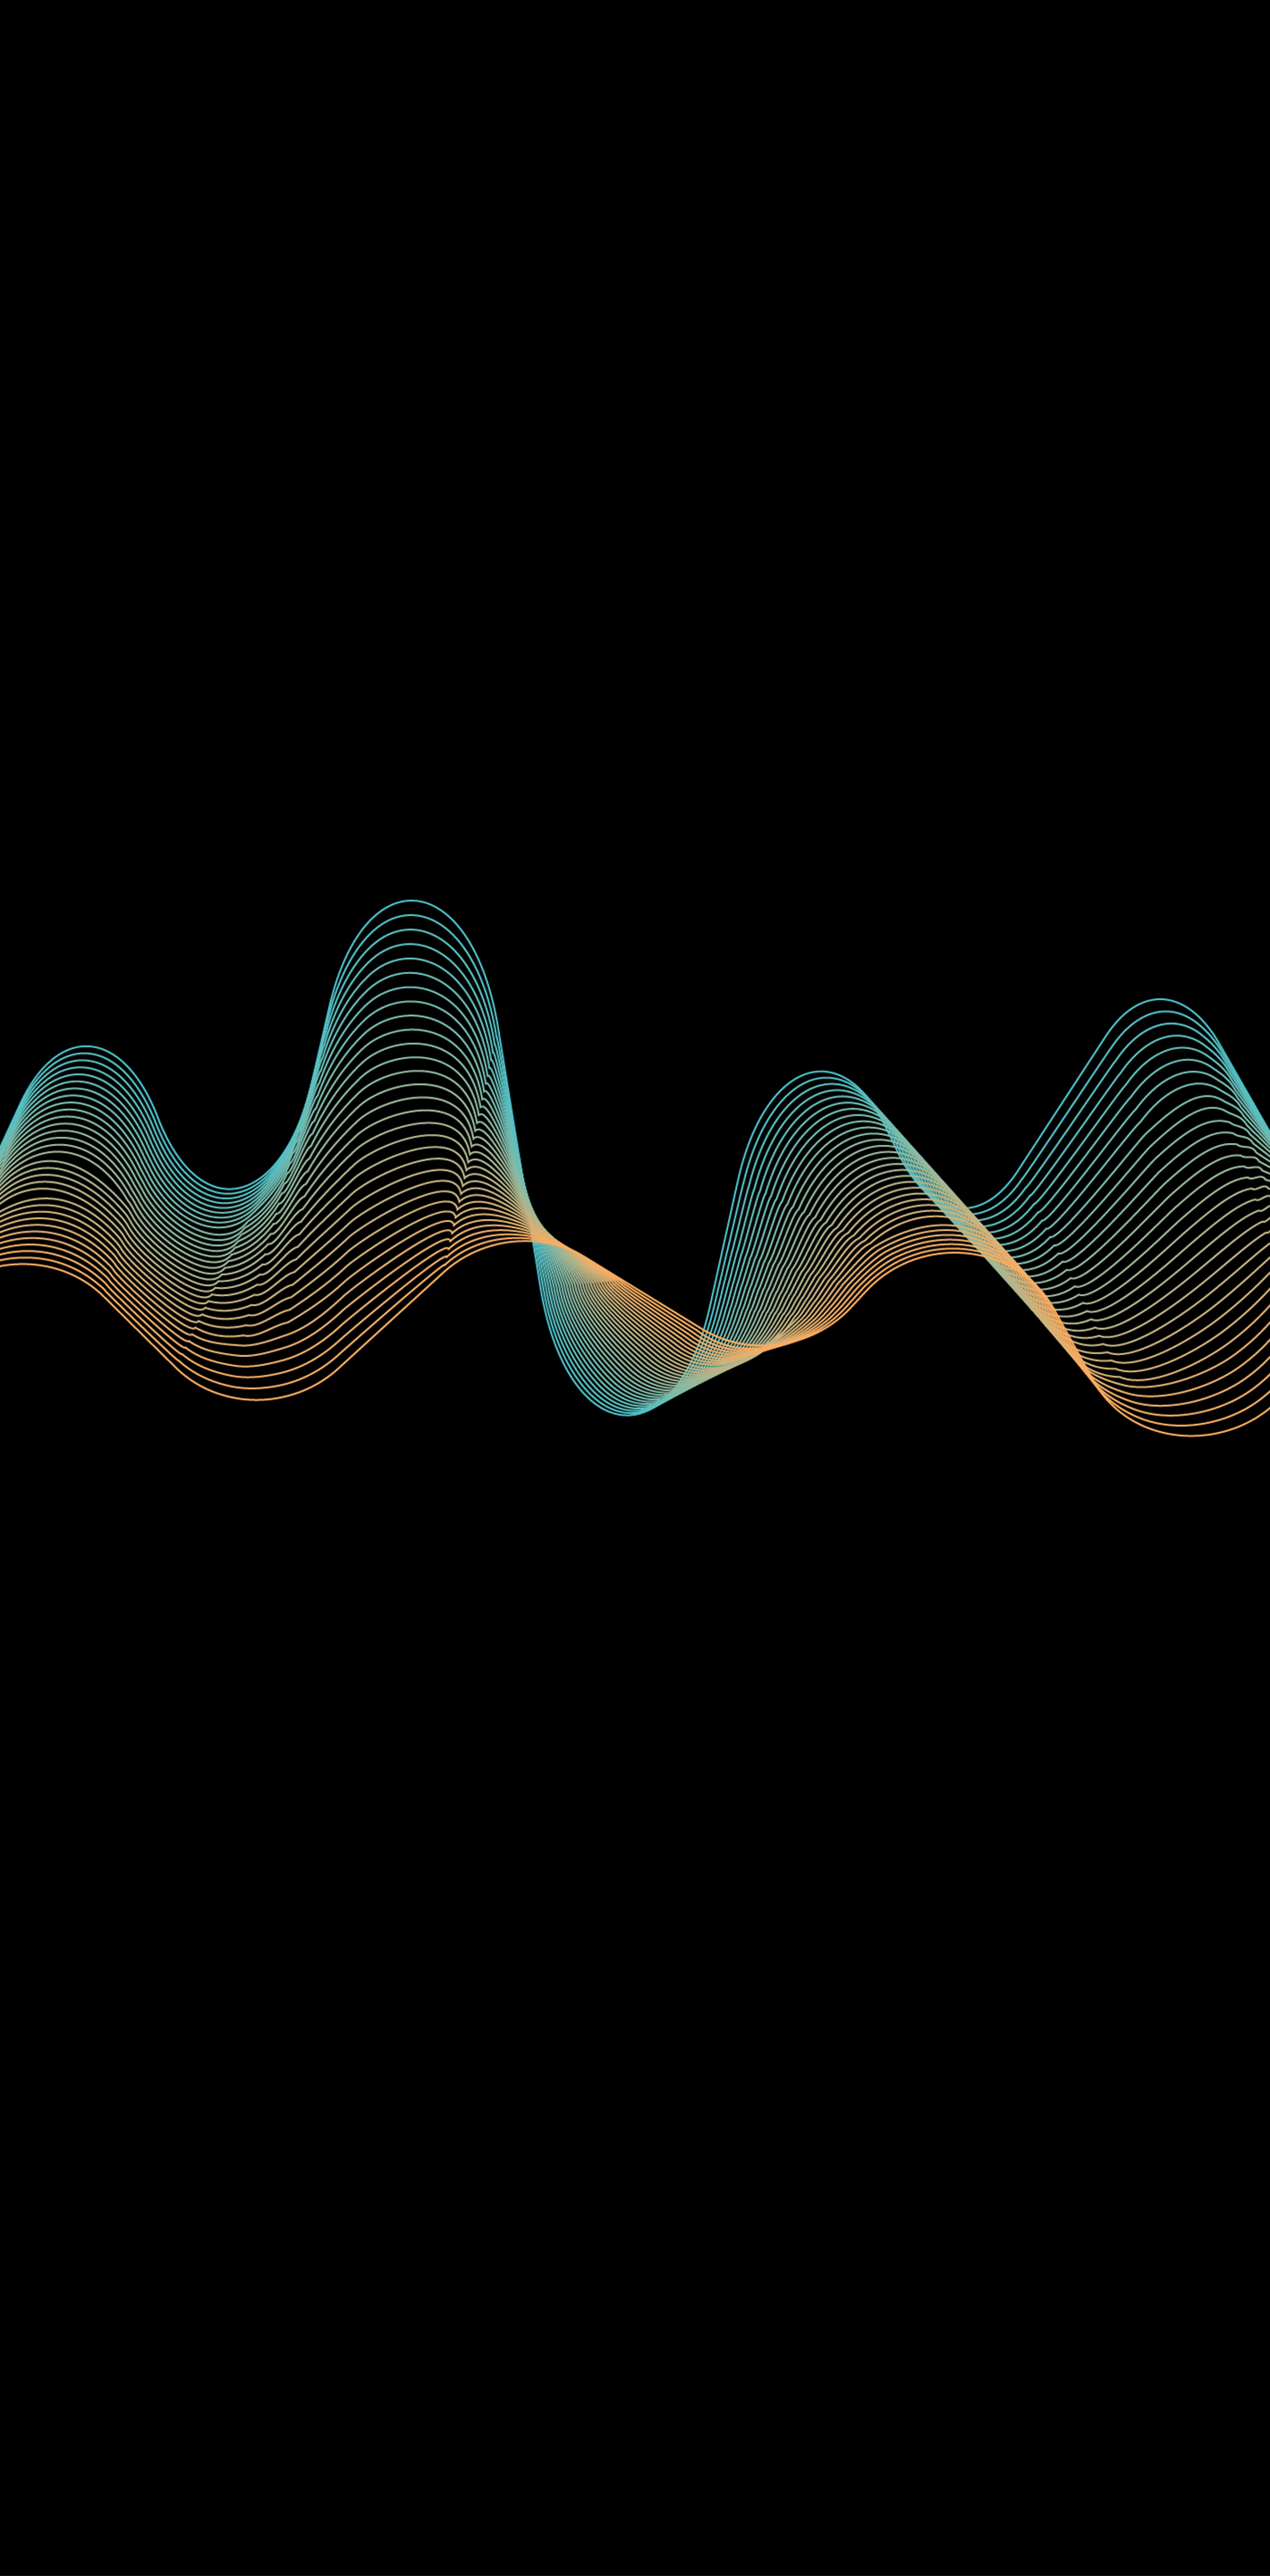 Colorful waveform wallpaper for iPhone